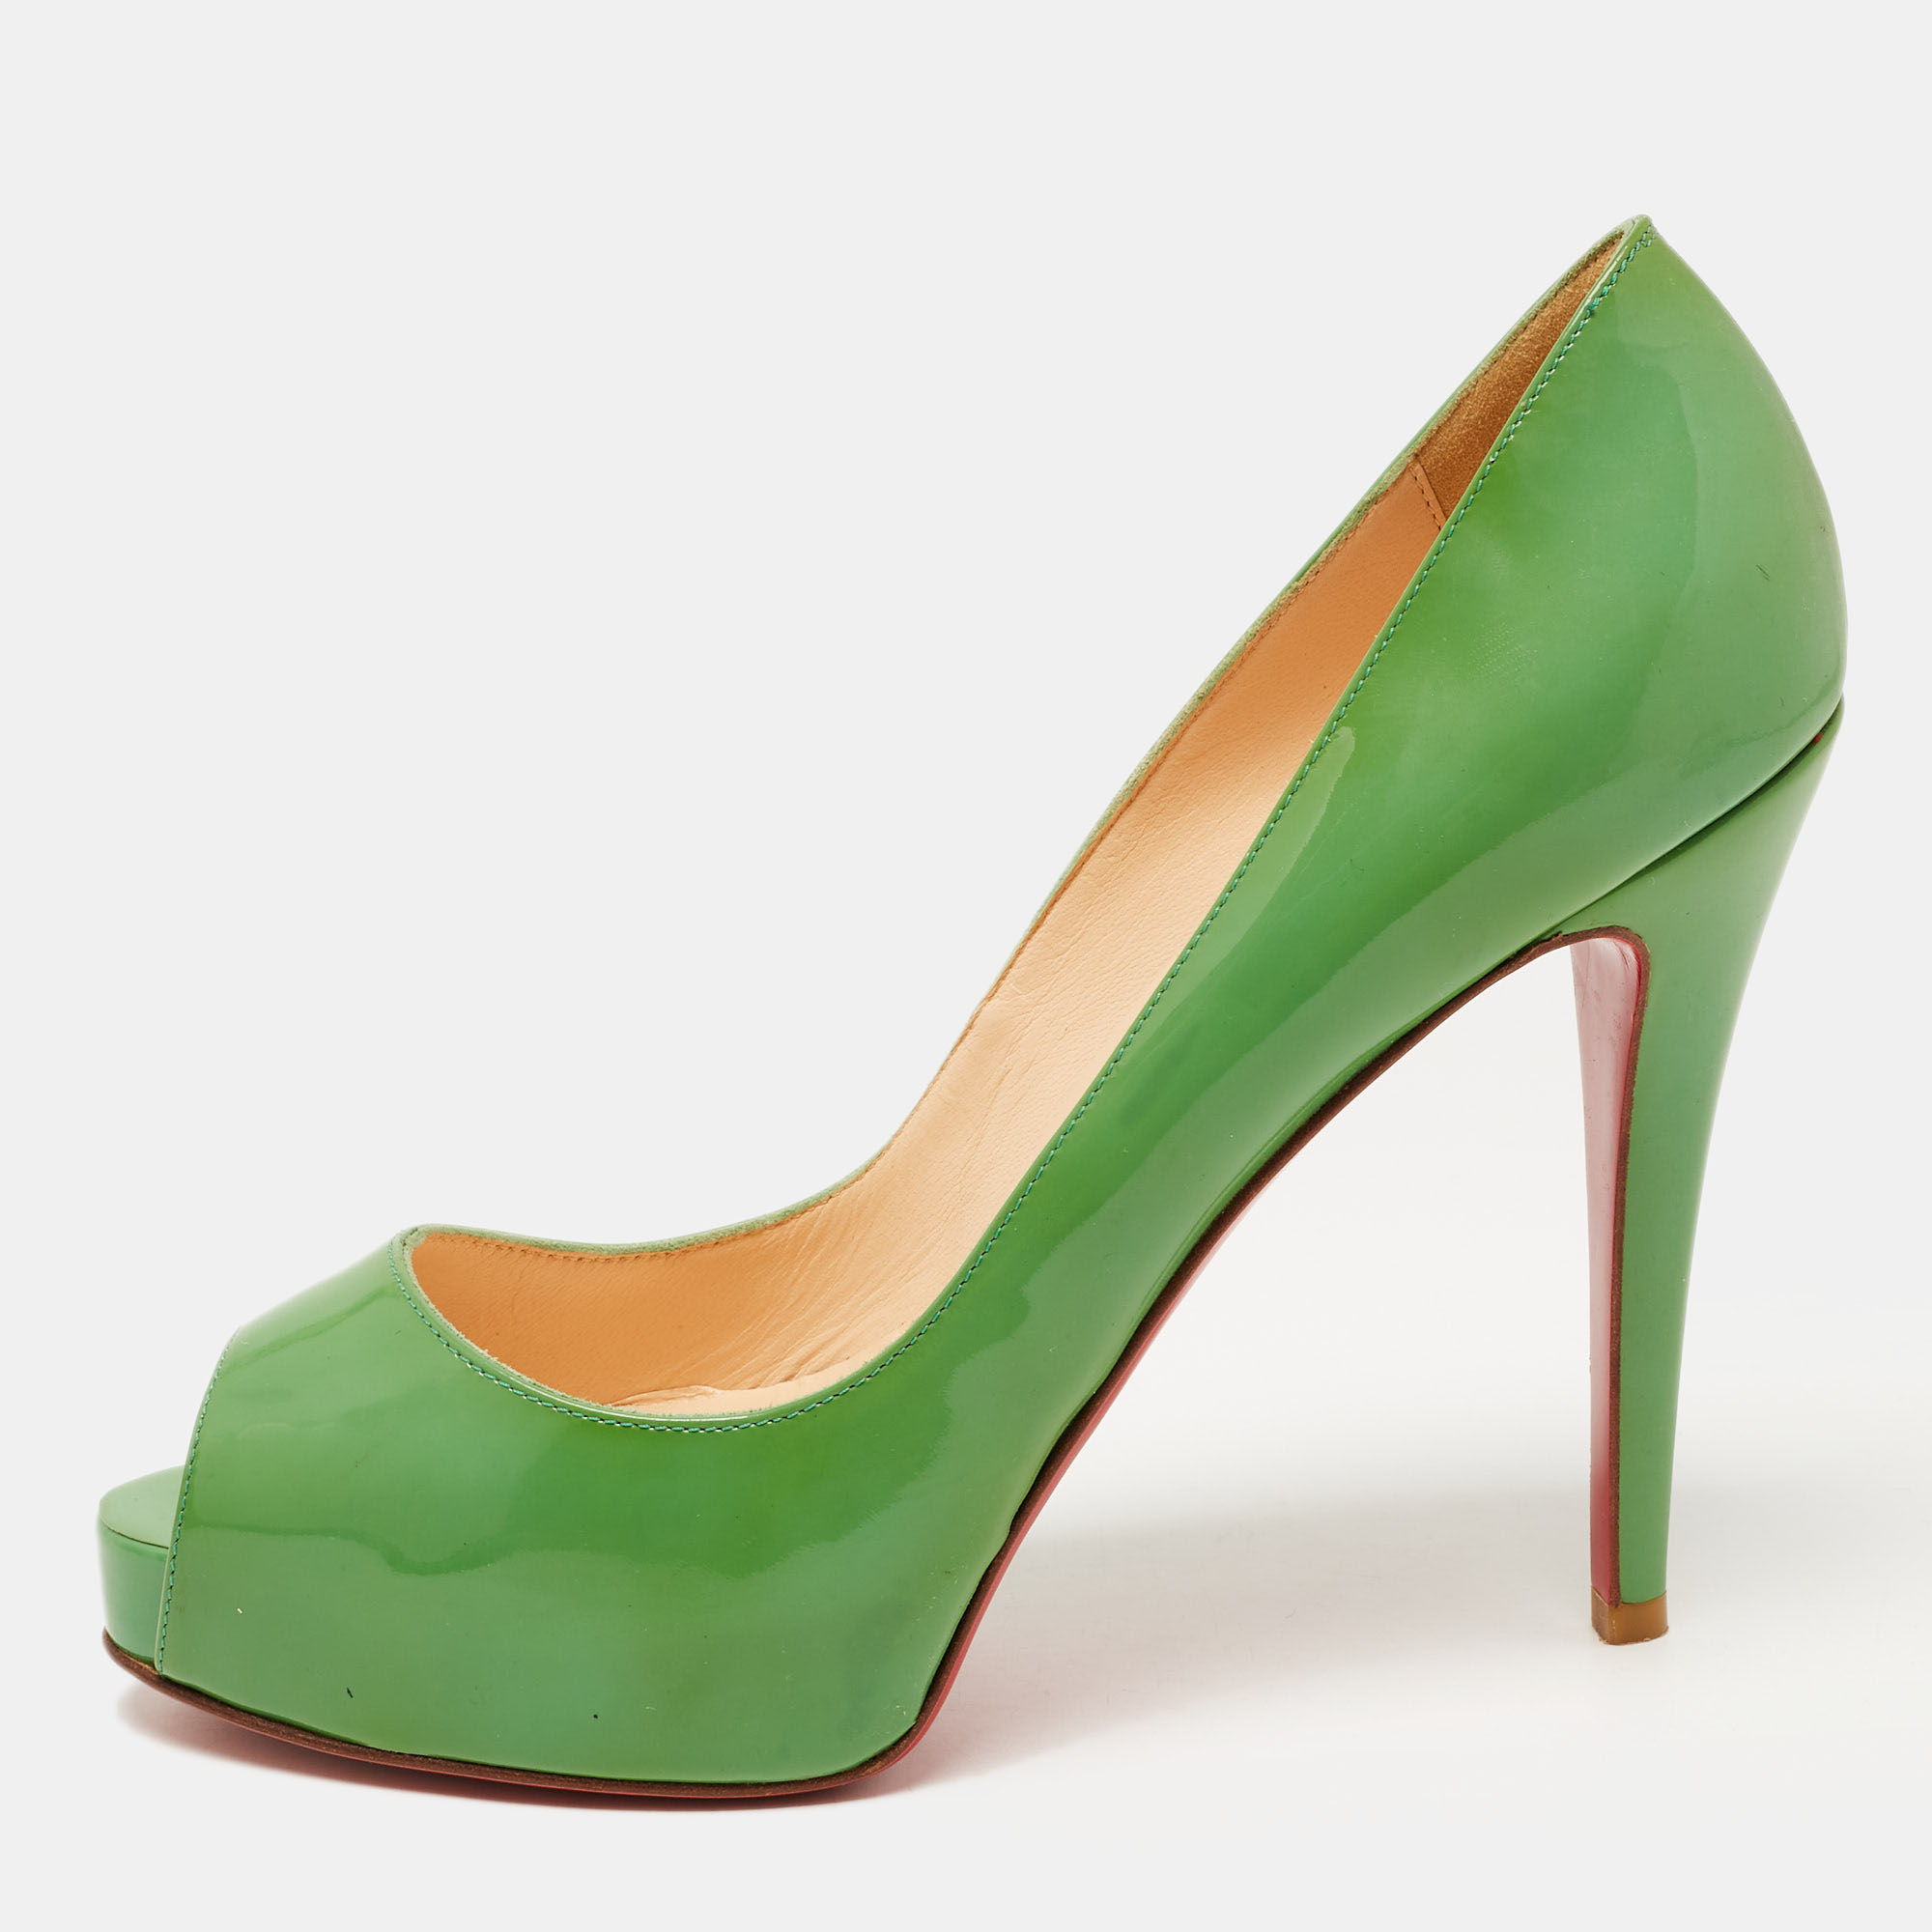 Pre-owned Christian Louboutin Green Patent Leather Very Prive Pumps Size 38.5